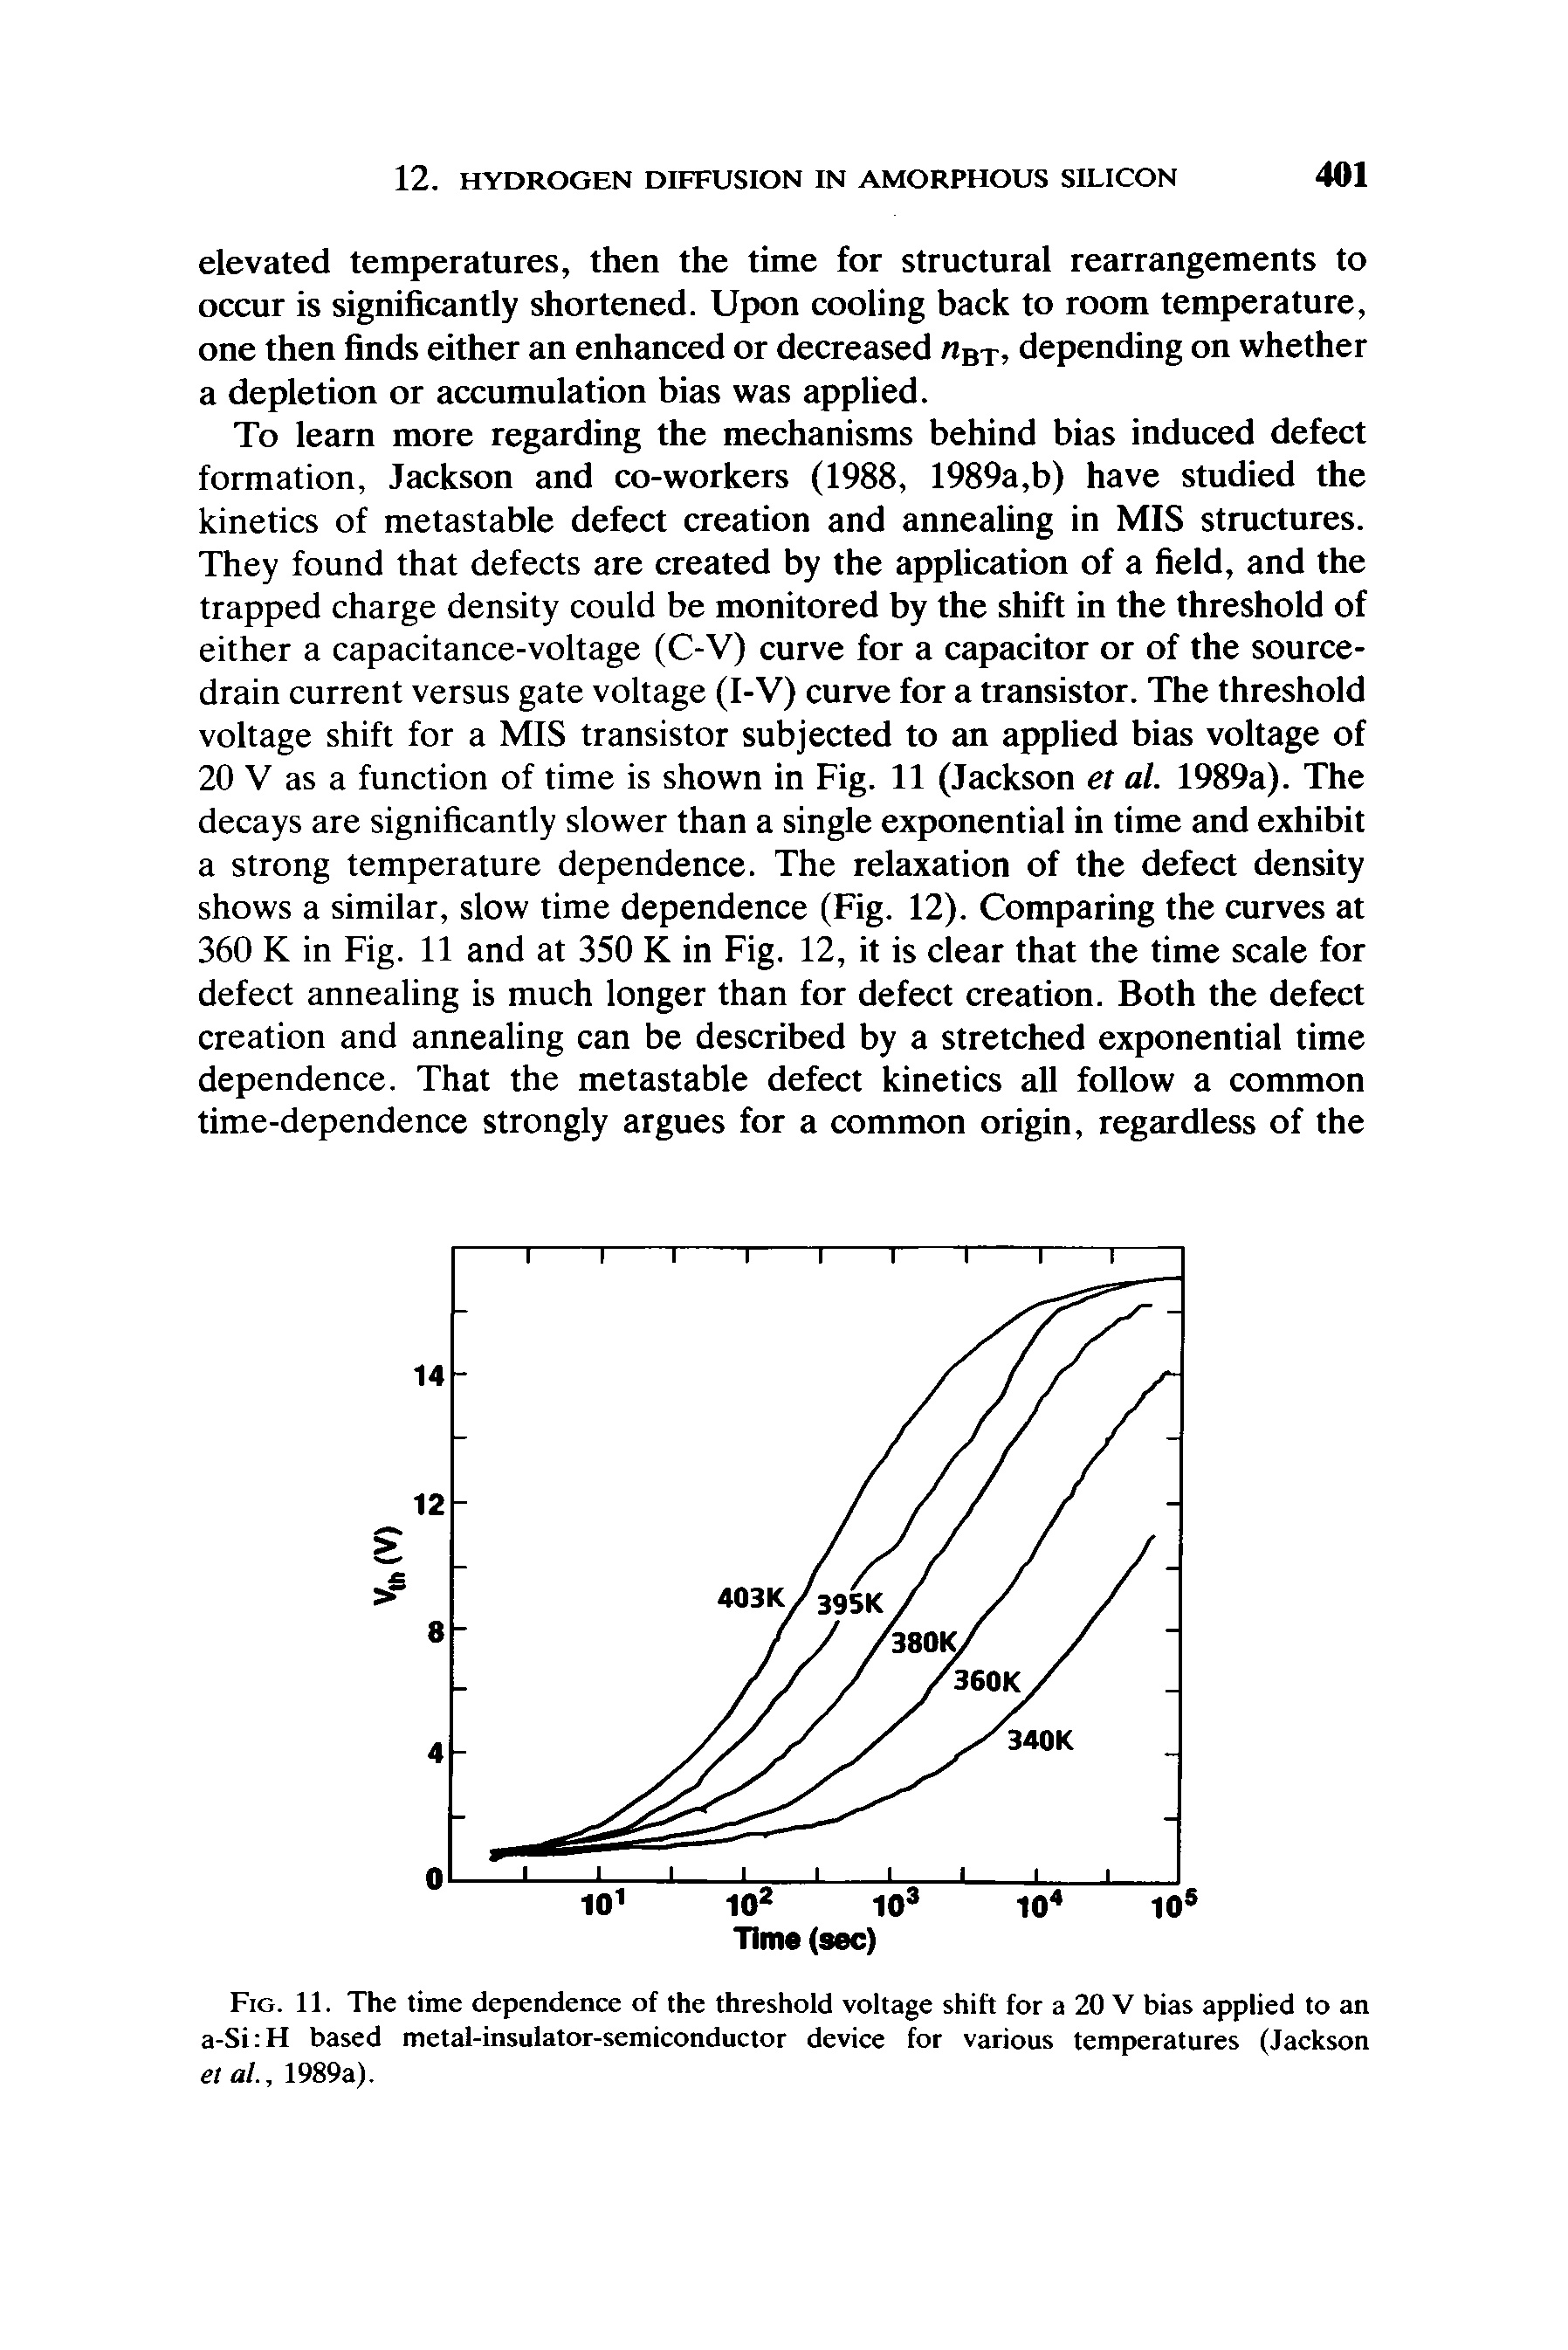 Fig. 11. The time dependence of the threshold voltage shift for a 20 V bias applied to an a-Si H based metal-insulator-semiconductor device for various temperatures (Jackson et al., 1989a).